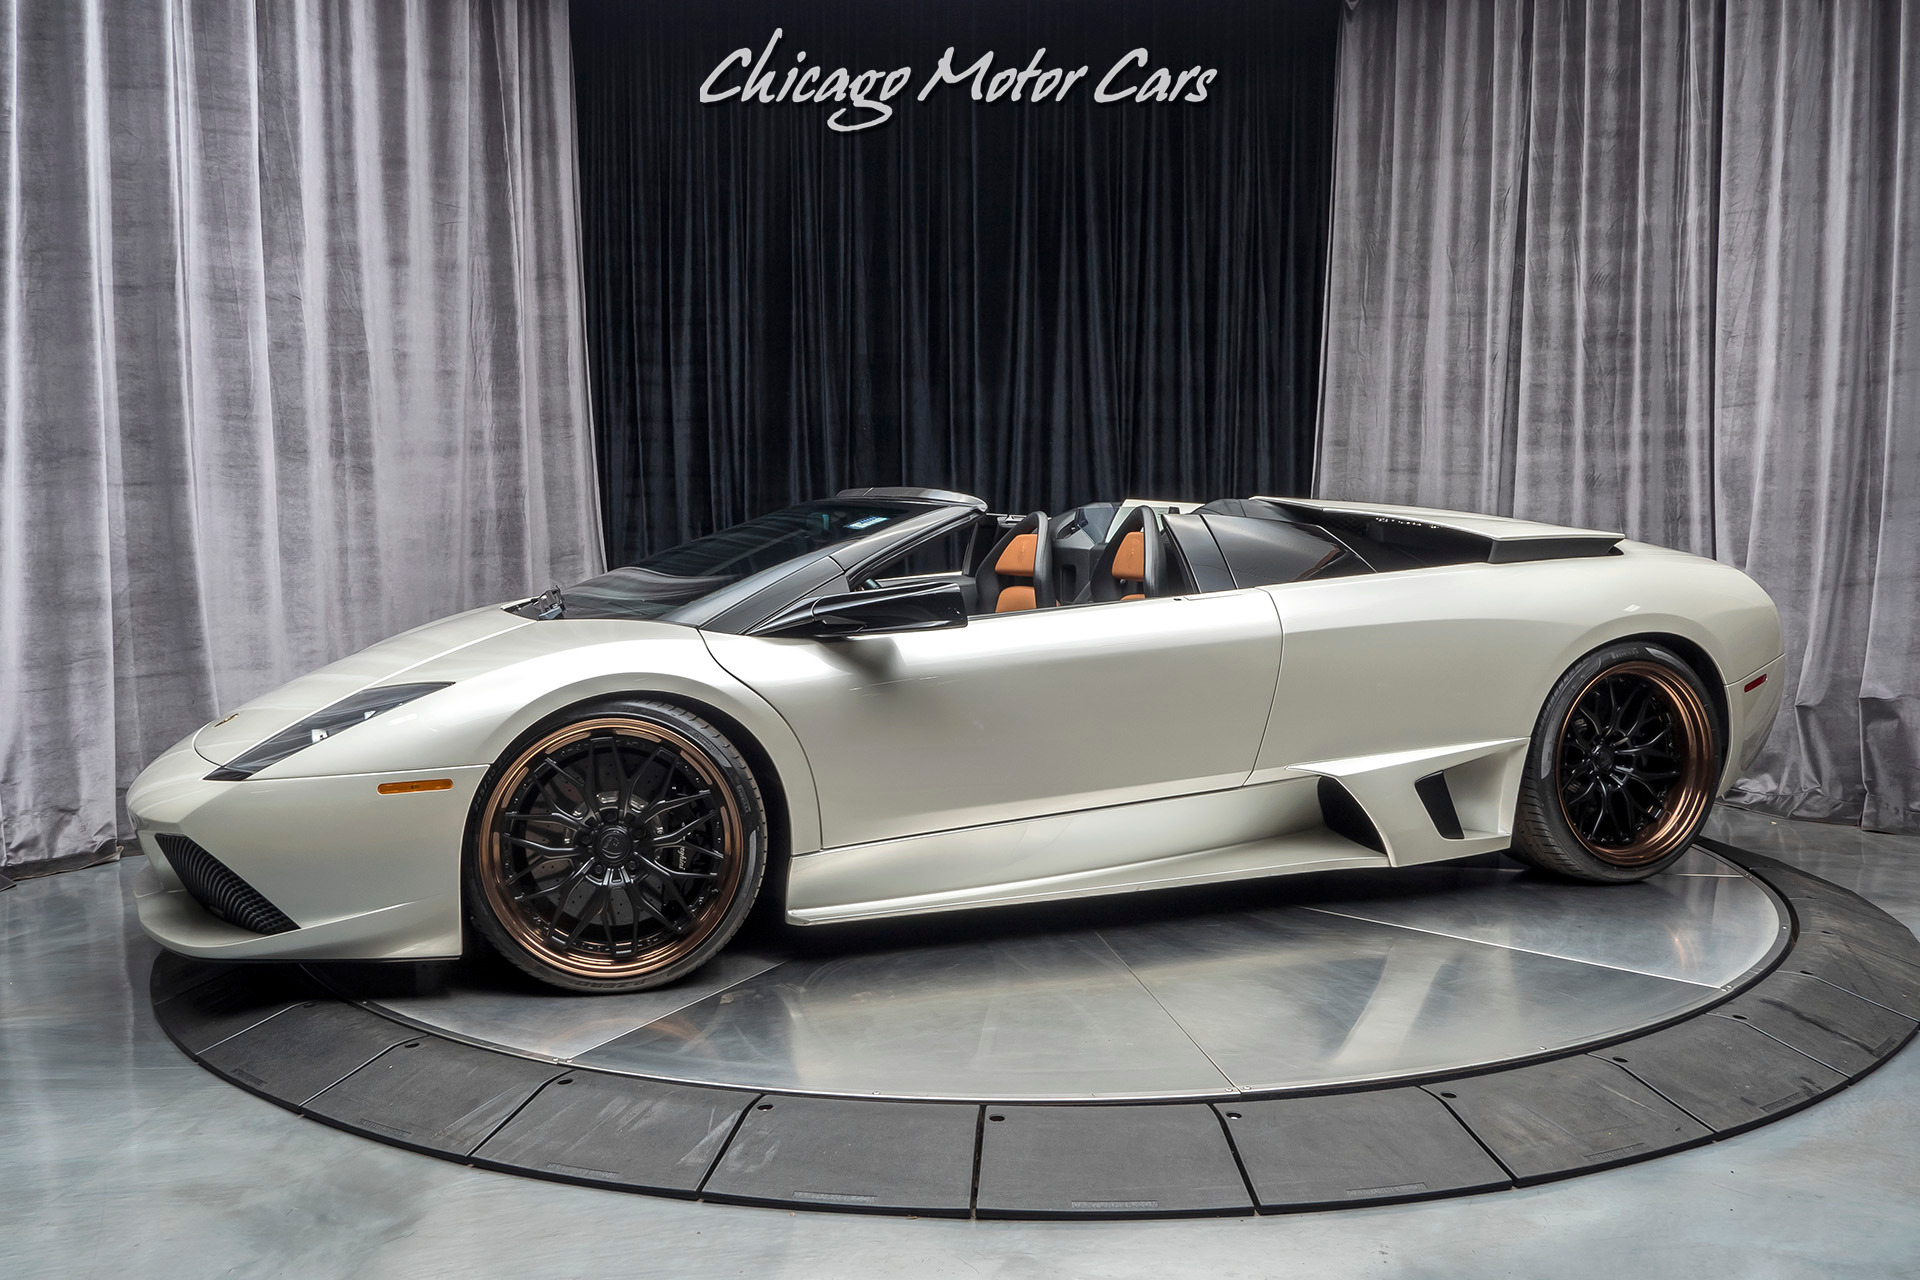 Used 2008 Lamborghini Murcielago LP640 Roadster 7k Miles! Incredible and  Rare Color Combo! ANRKY For Sale (Special Pricing) | Chicago Motor Cars  Stock #16496